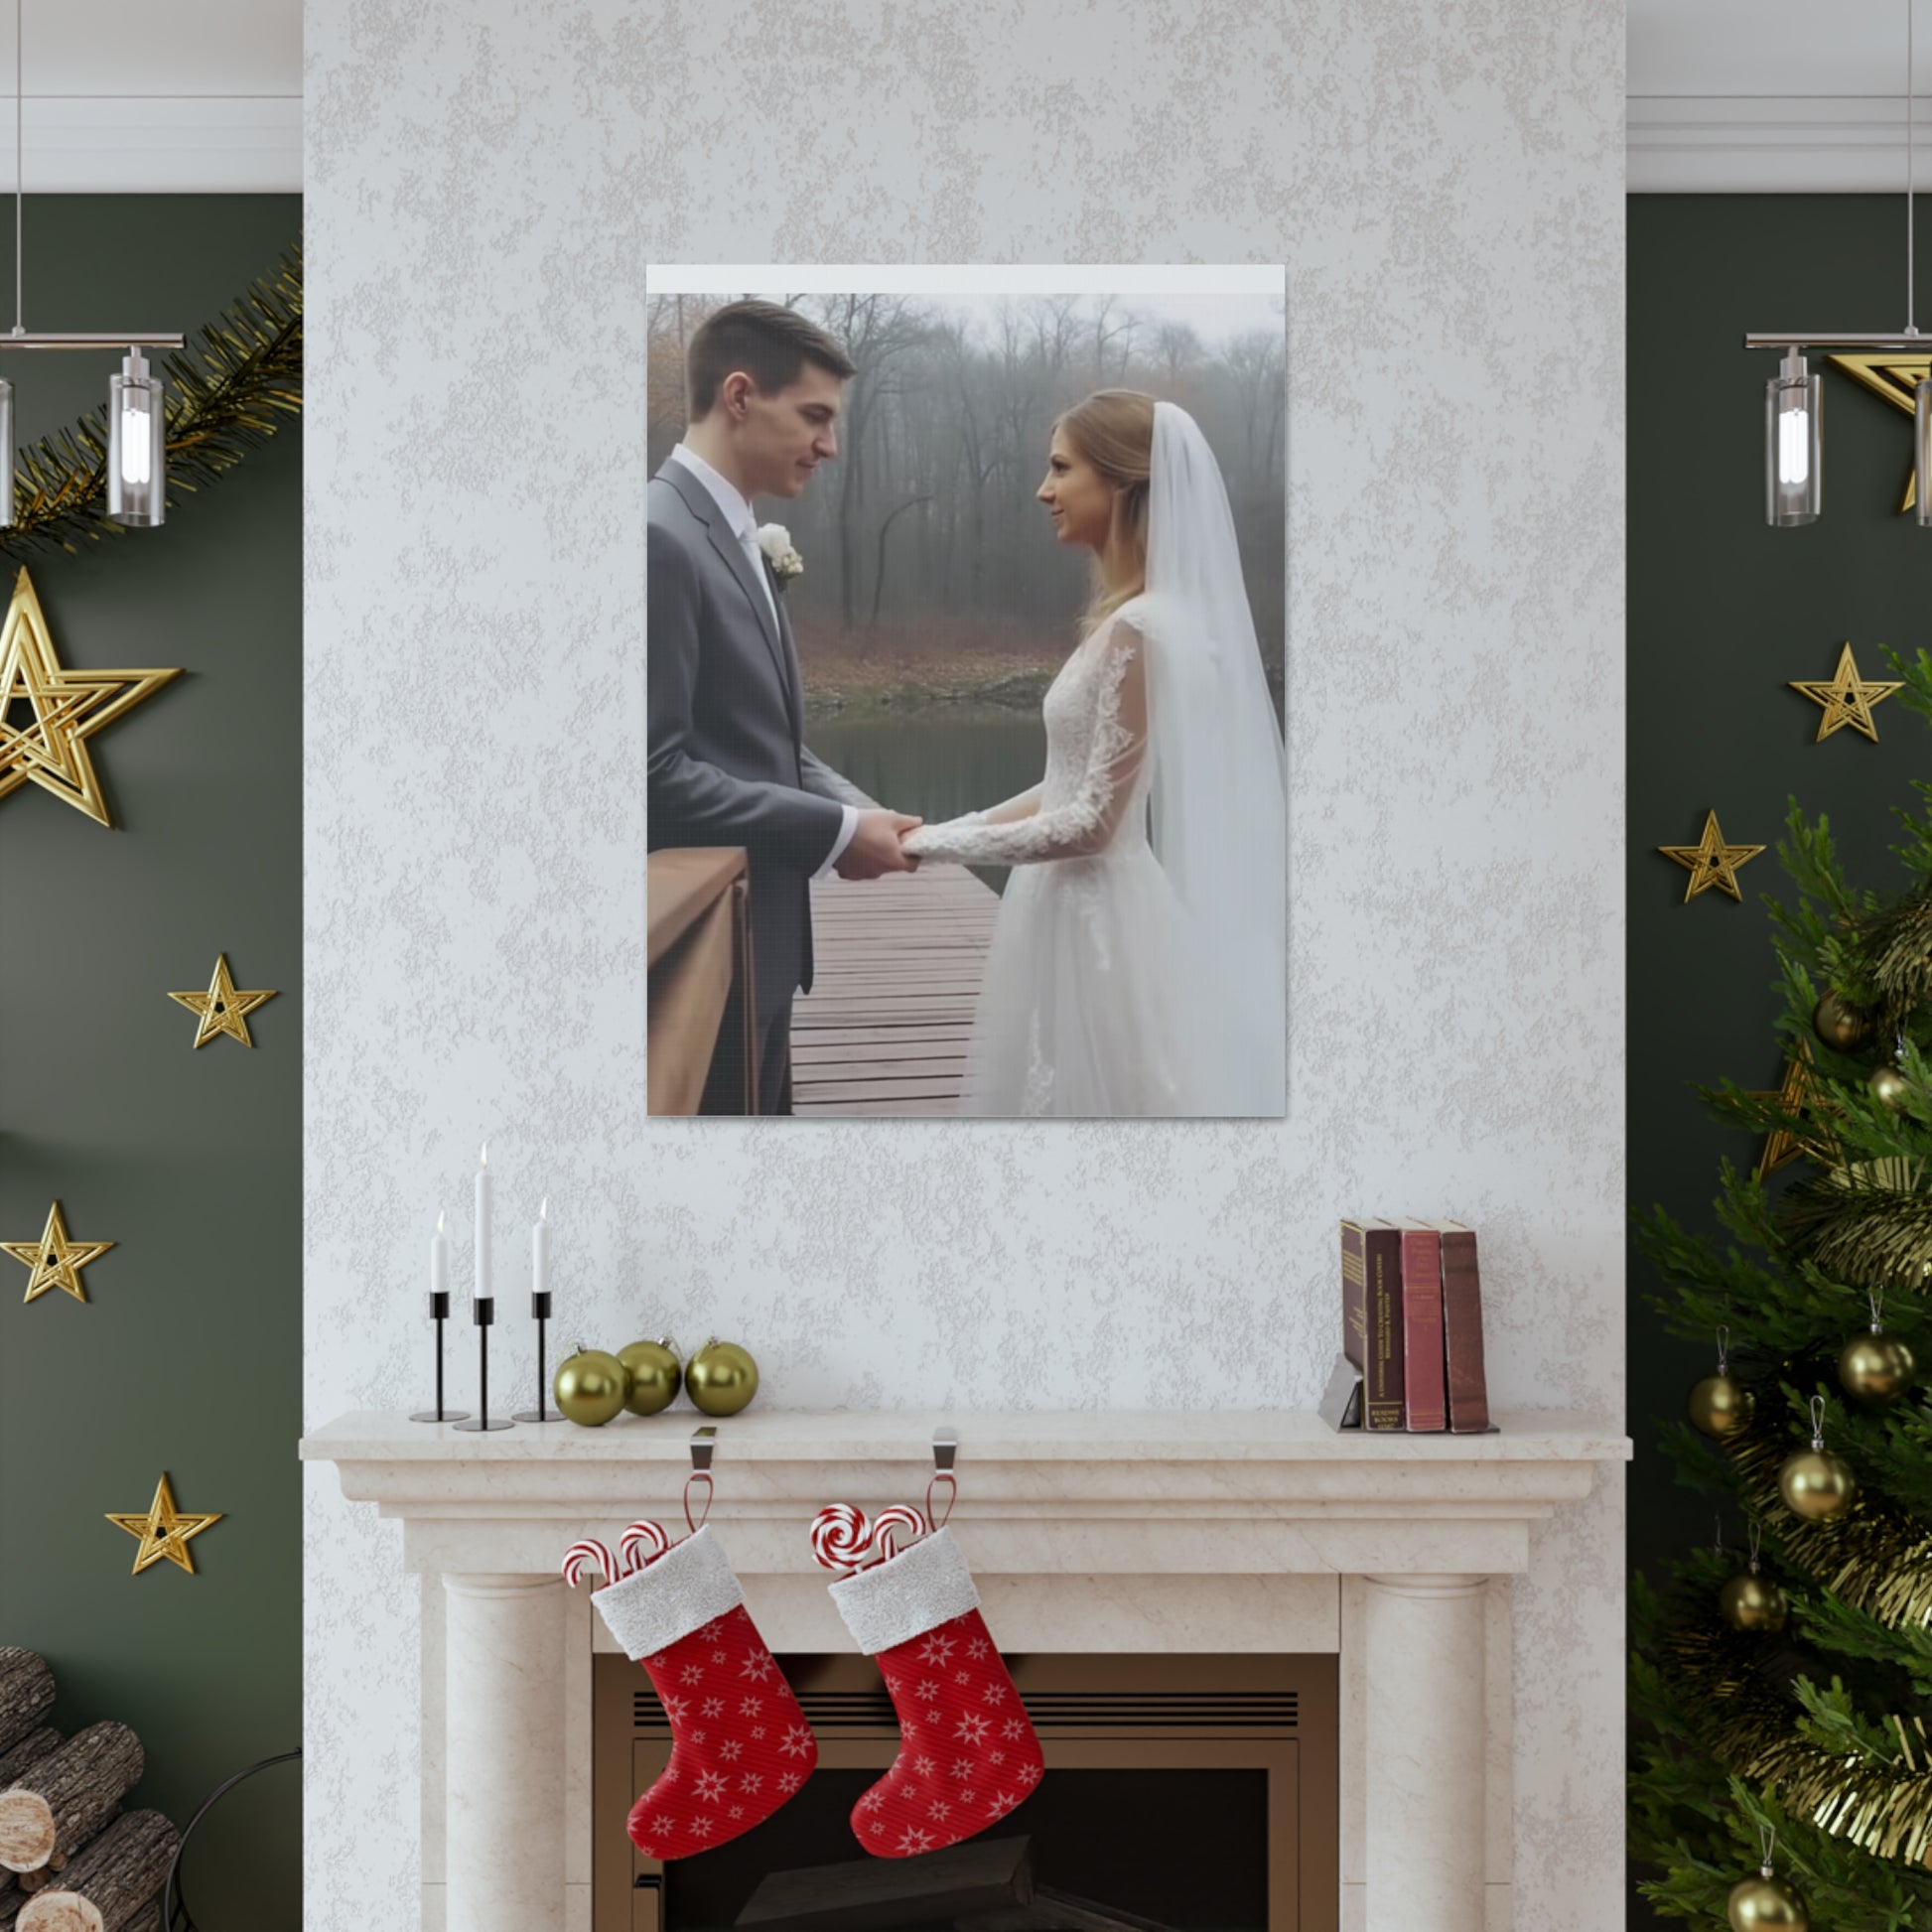 "Wedding Day" Custom Photo Wall Print - Weave Got Gifts - Unique Gifts You Won’t Find Anywhere Else!